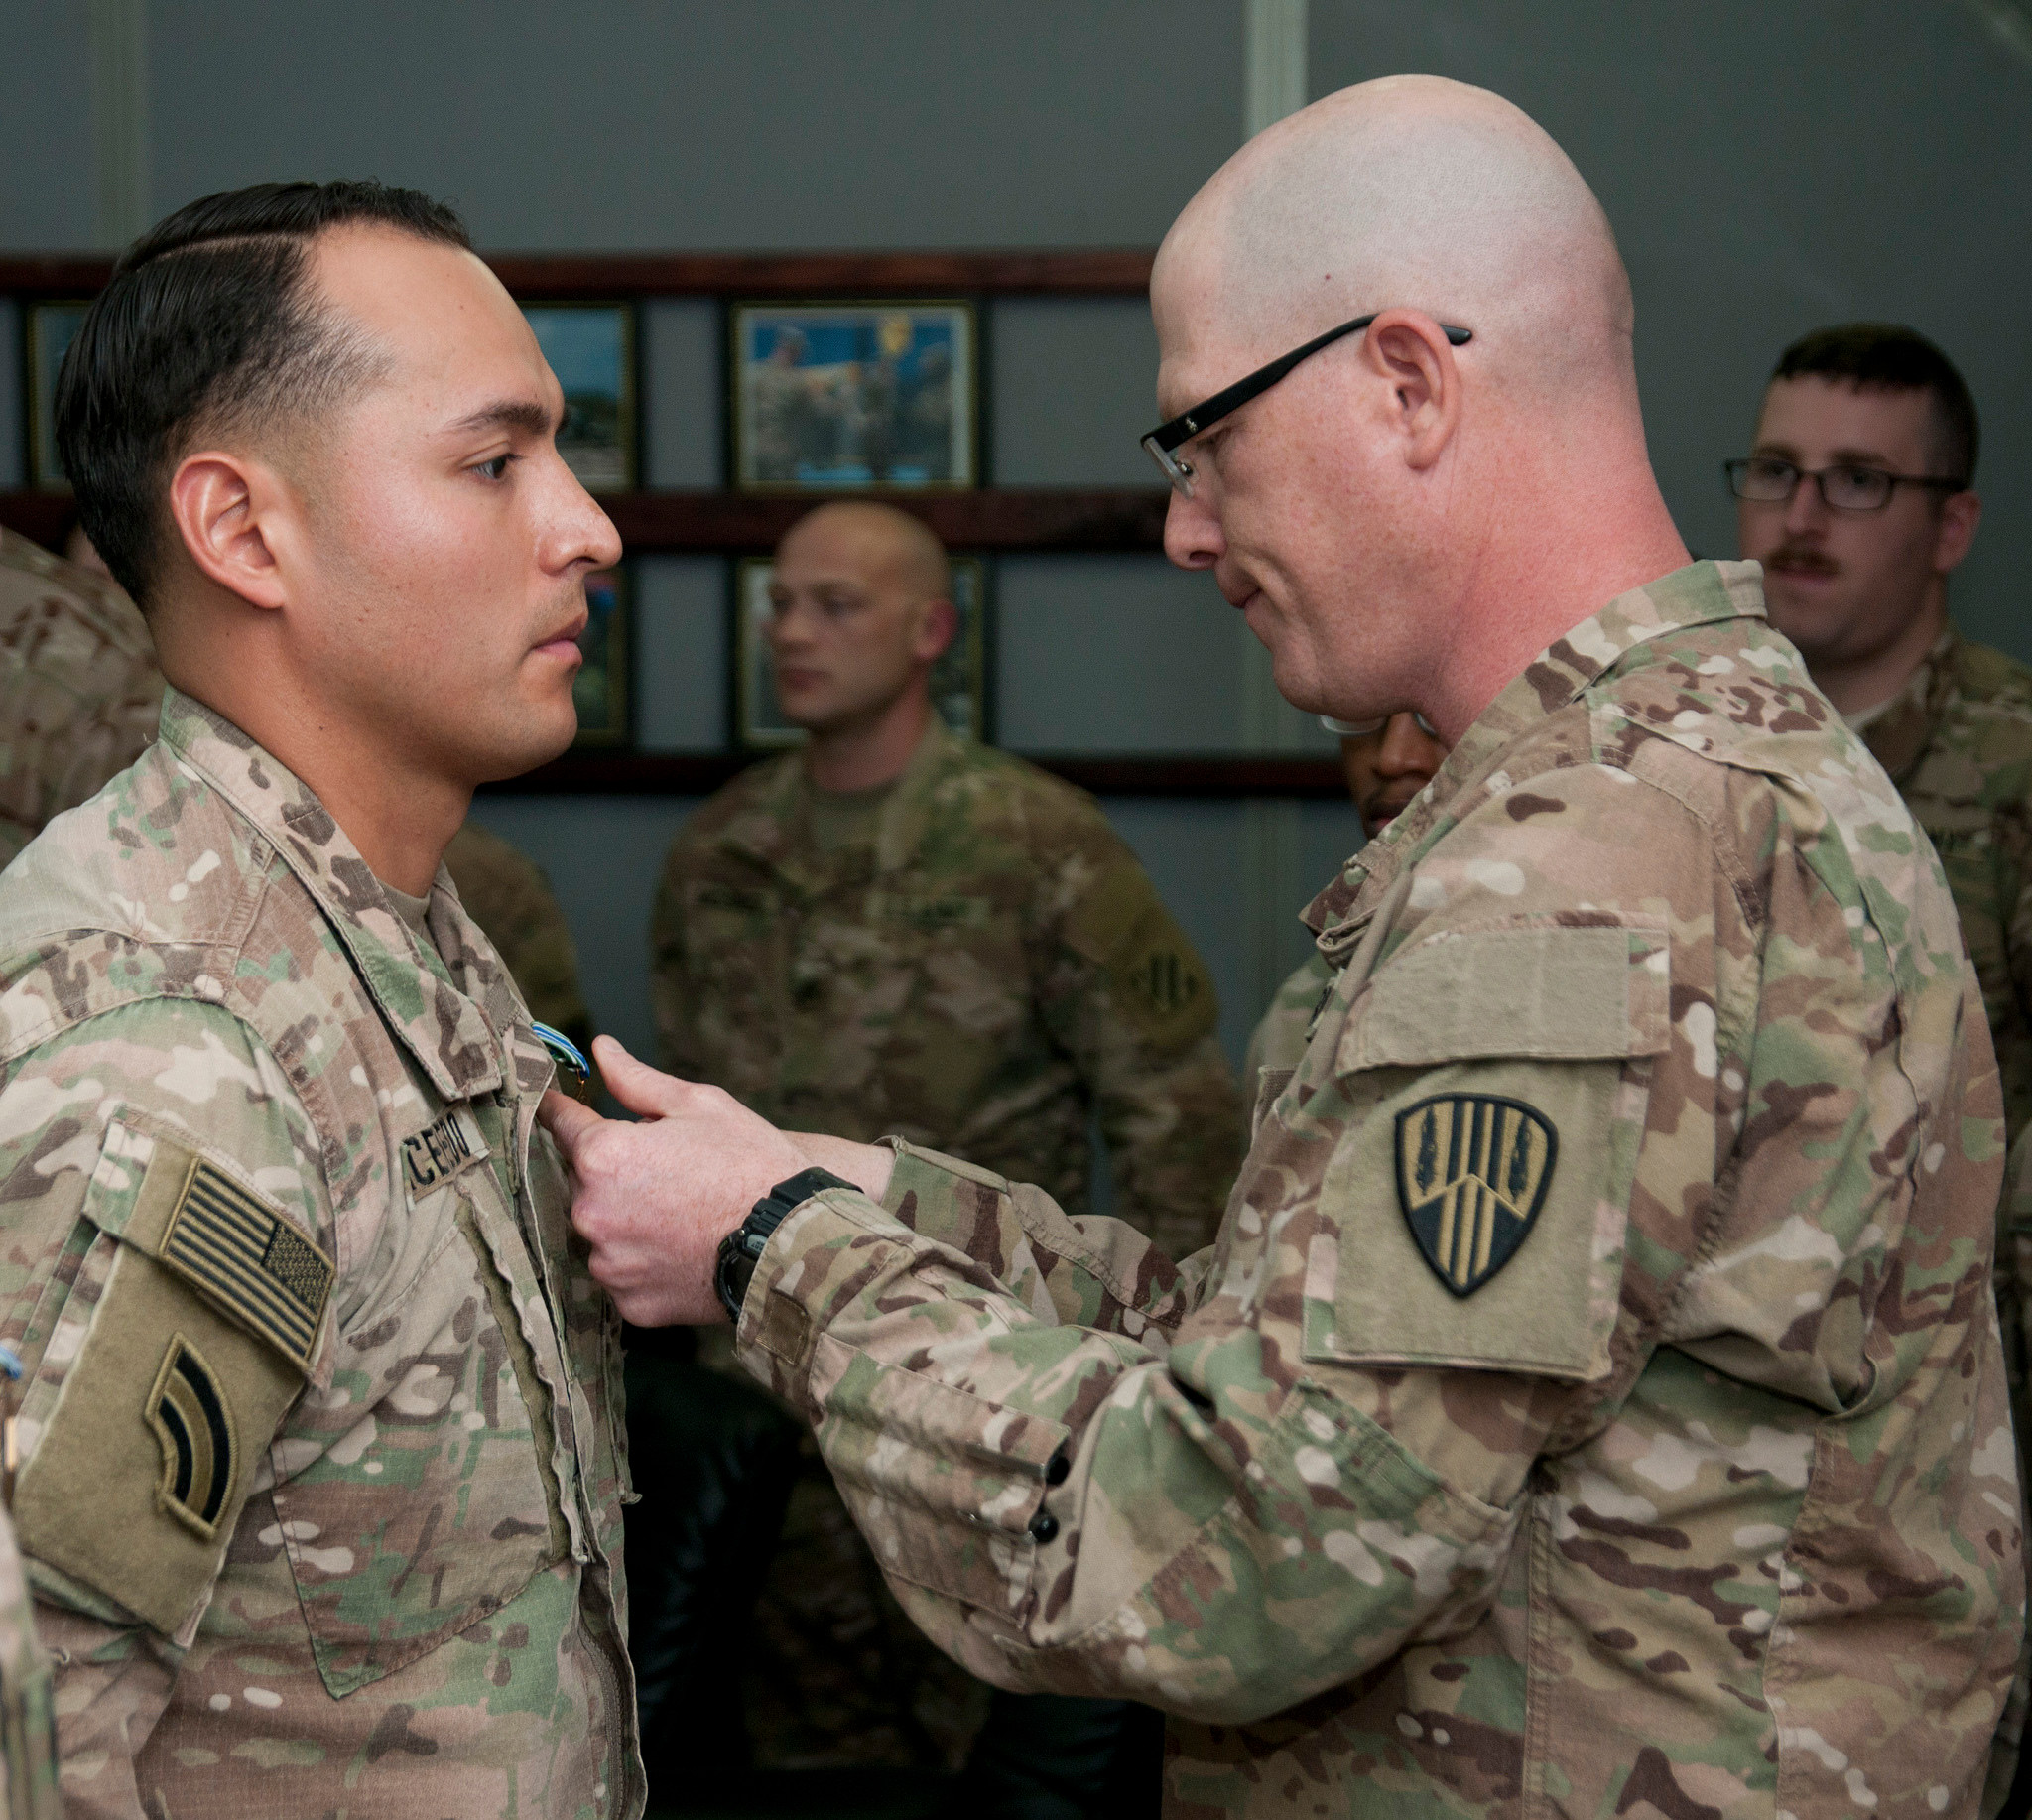 Col. Stephen Bousquet, right, commander of the 369th Sustainment Brigade, presented an Army Achievement Medal to Sgt. Damian Acevedo, of Valley Stream, during a ceremony at Camp Arifjan, Kuwait on Jan. 14.